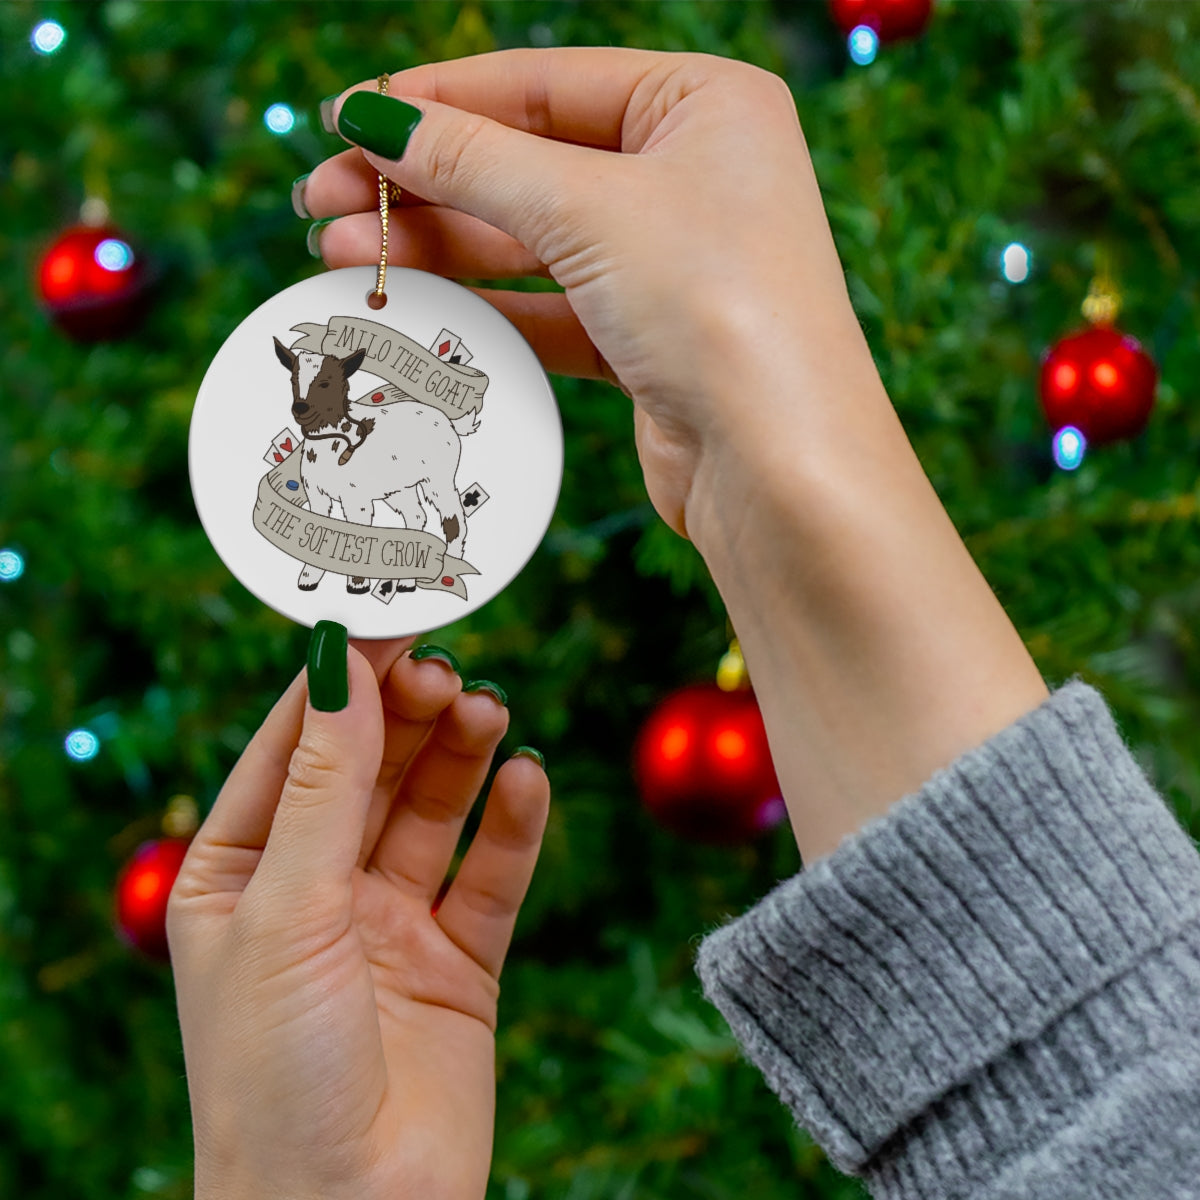 Milo the Goat the Softest Crow Ceramic Star Ornament Gift for Book Lovers Gift For Her Reader Bookish Merch SOC Six of Crows Keepsake Gift Tag Gift Topper